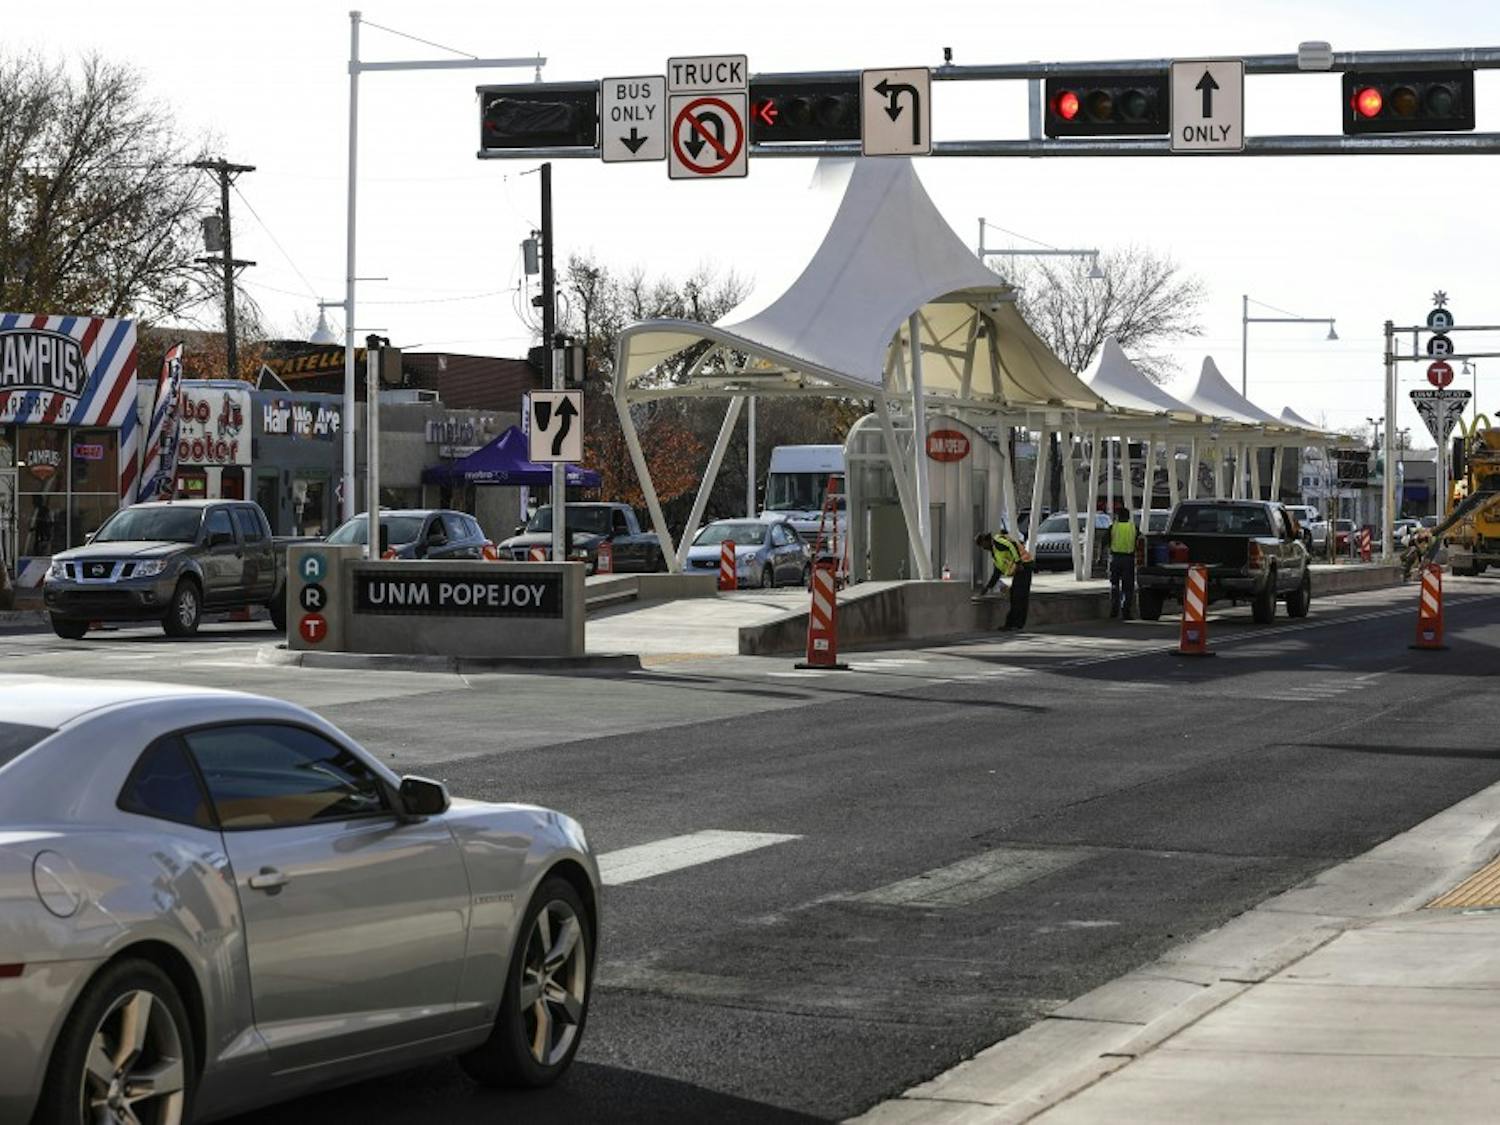 Cars pass the intersection of Central Ave. SE and Cornell Drive SE, near new street signs for the Albuquerque Rapid Transit system, Nov 29, 2017.